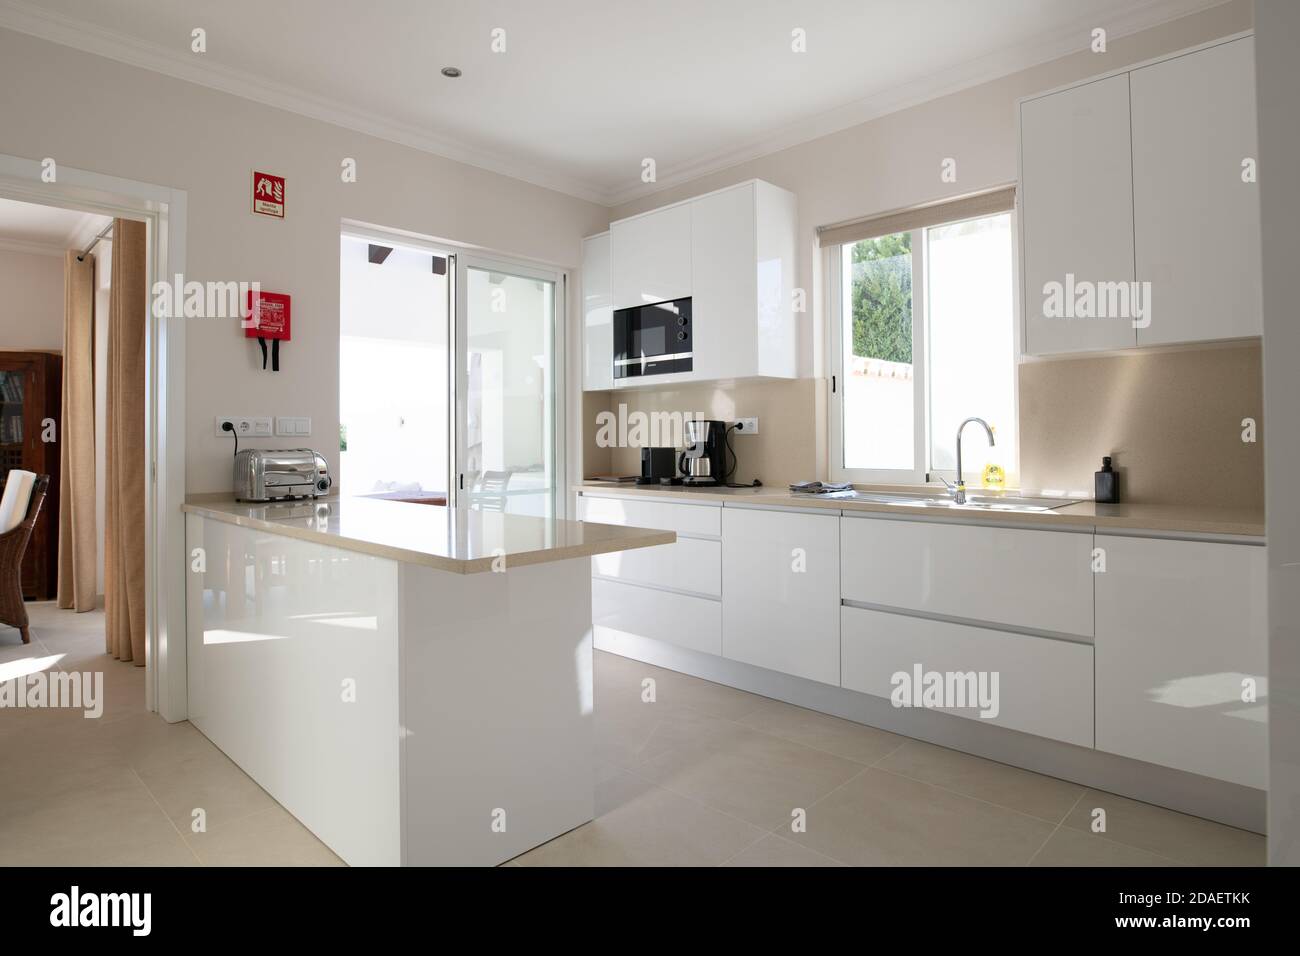 Brand new modern kitchen with white cabinets and beige stone counter top and ceramic tiled floor Stock Photo